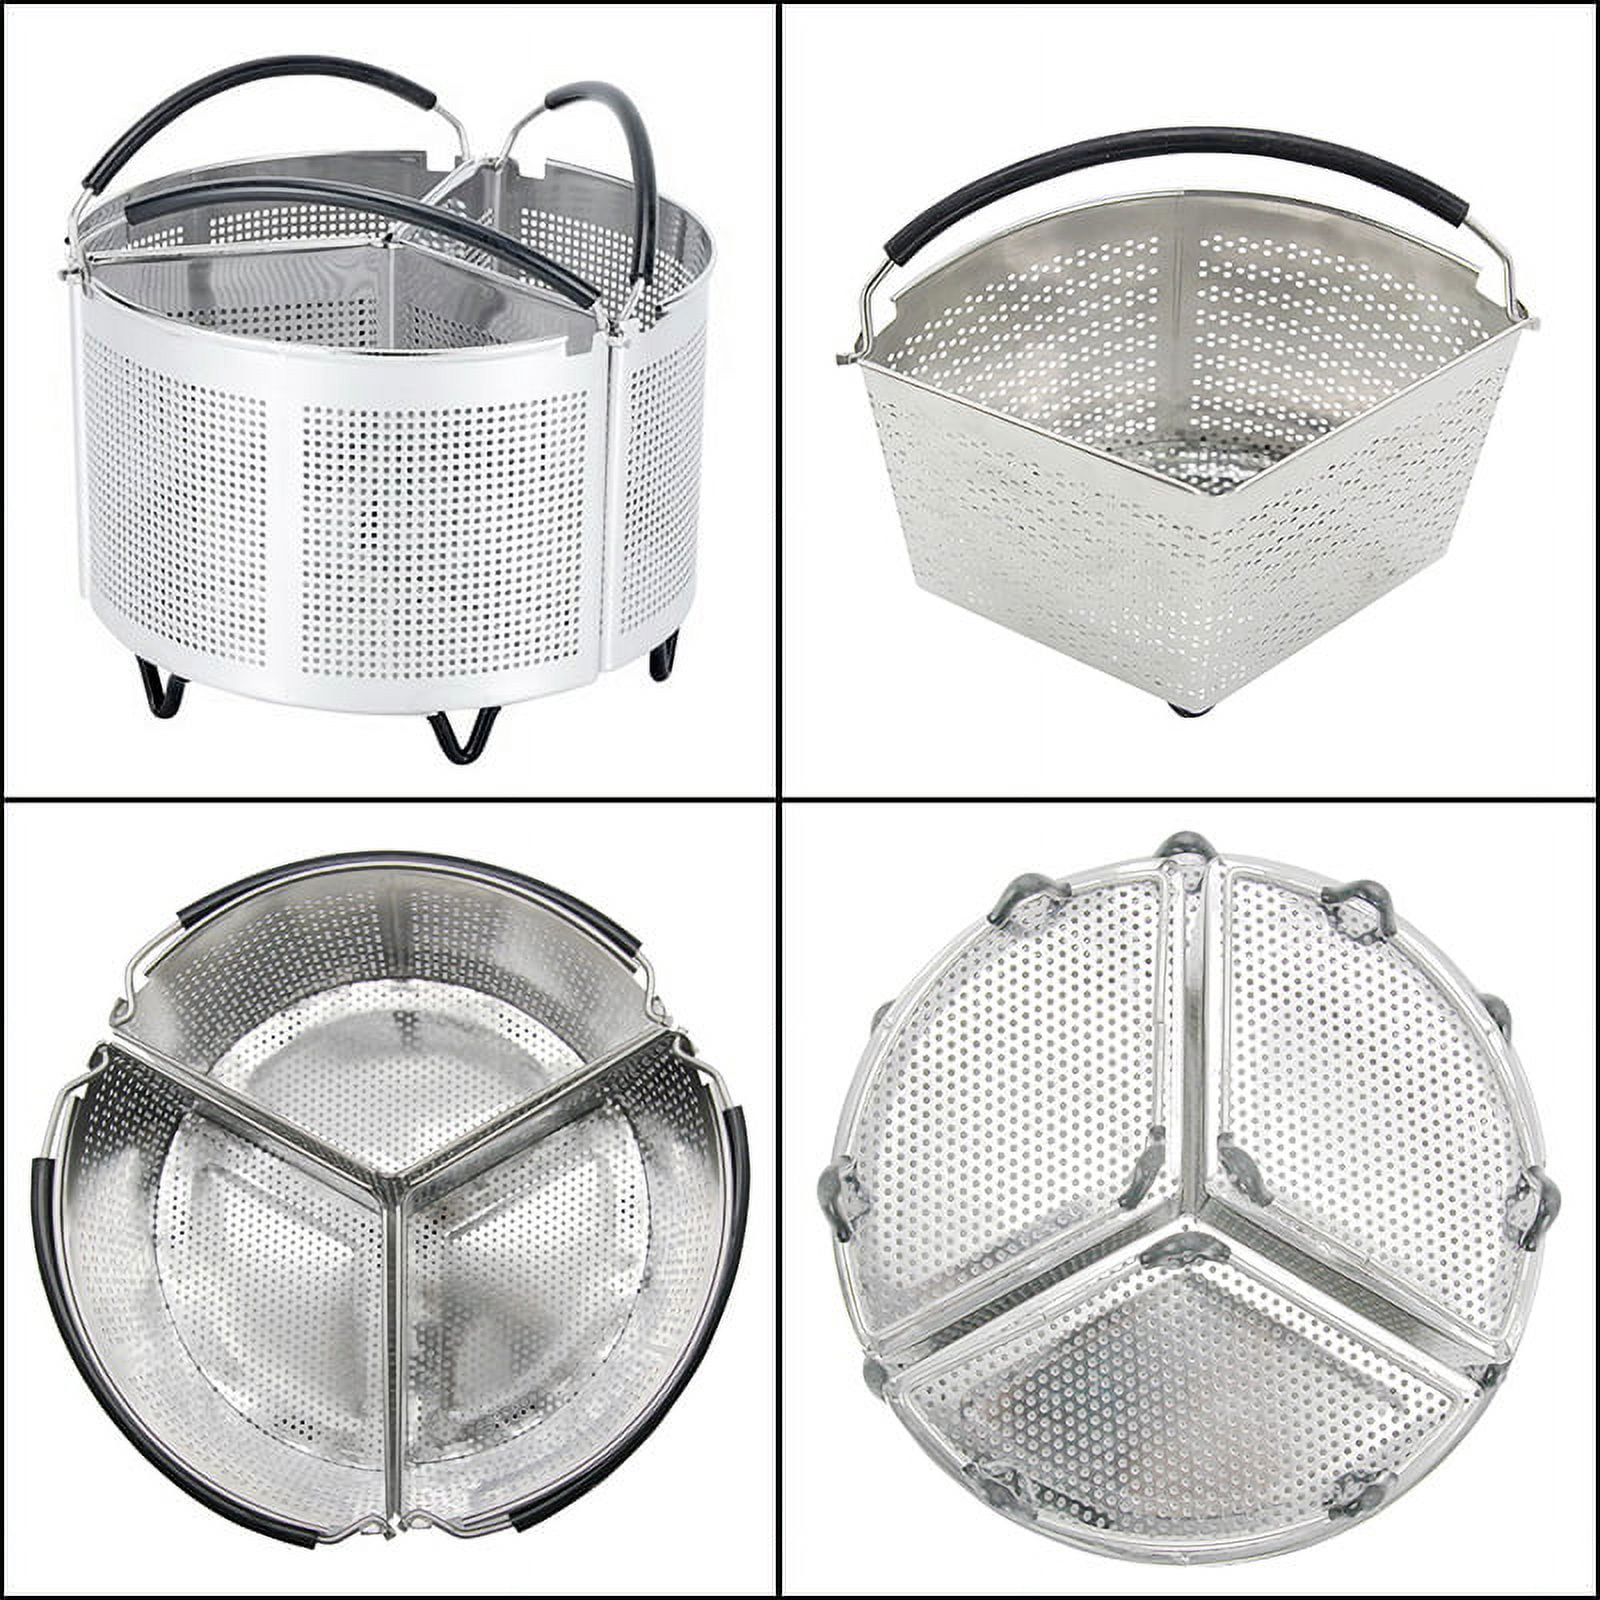 Dropship New Home Stainless Steel Steamer Basket For Instant Pot W